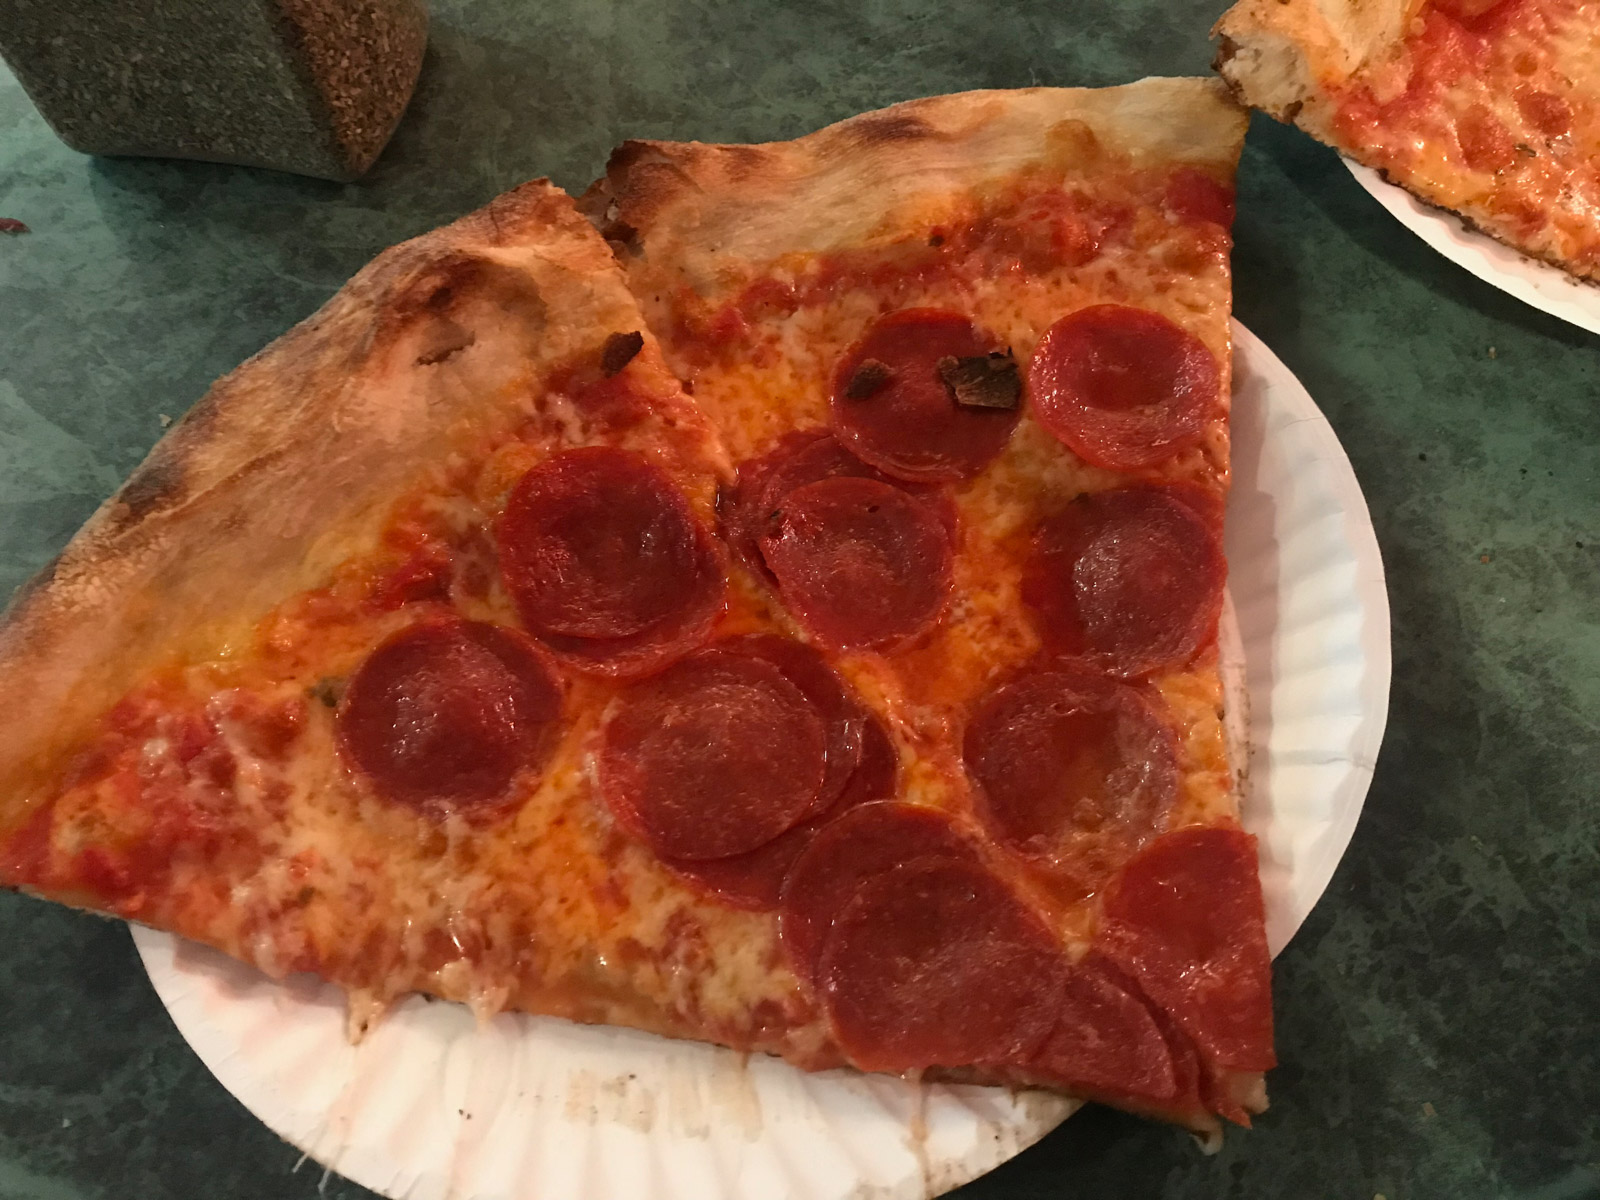 A few slices of pepperoni pizza on a white paper plate